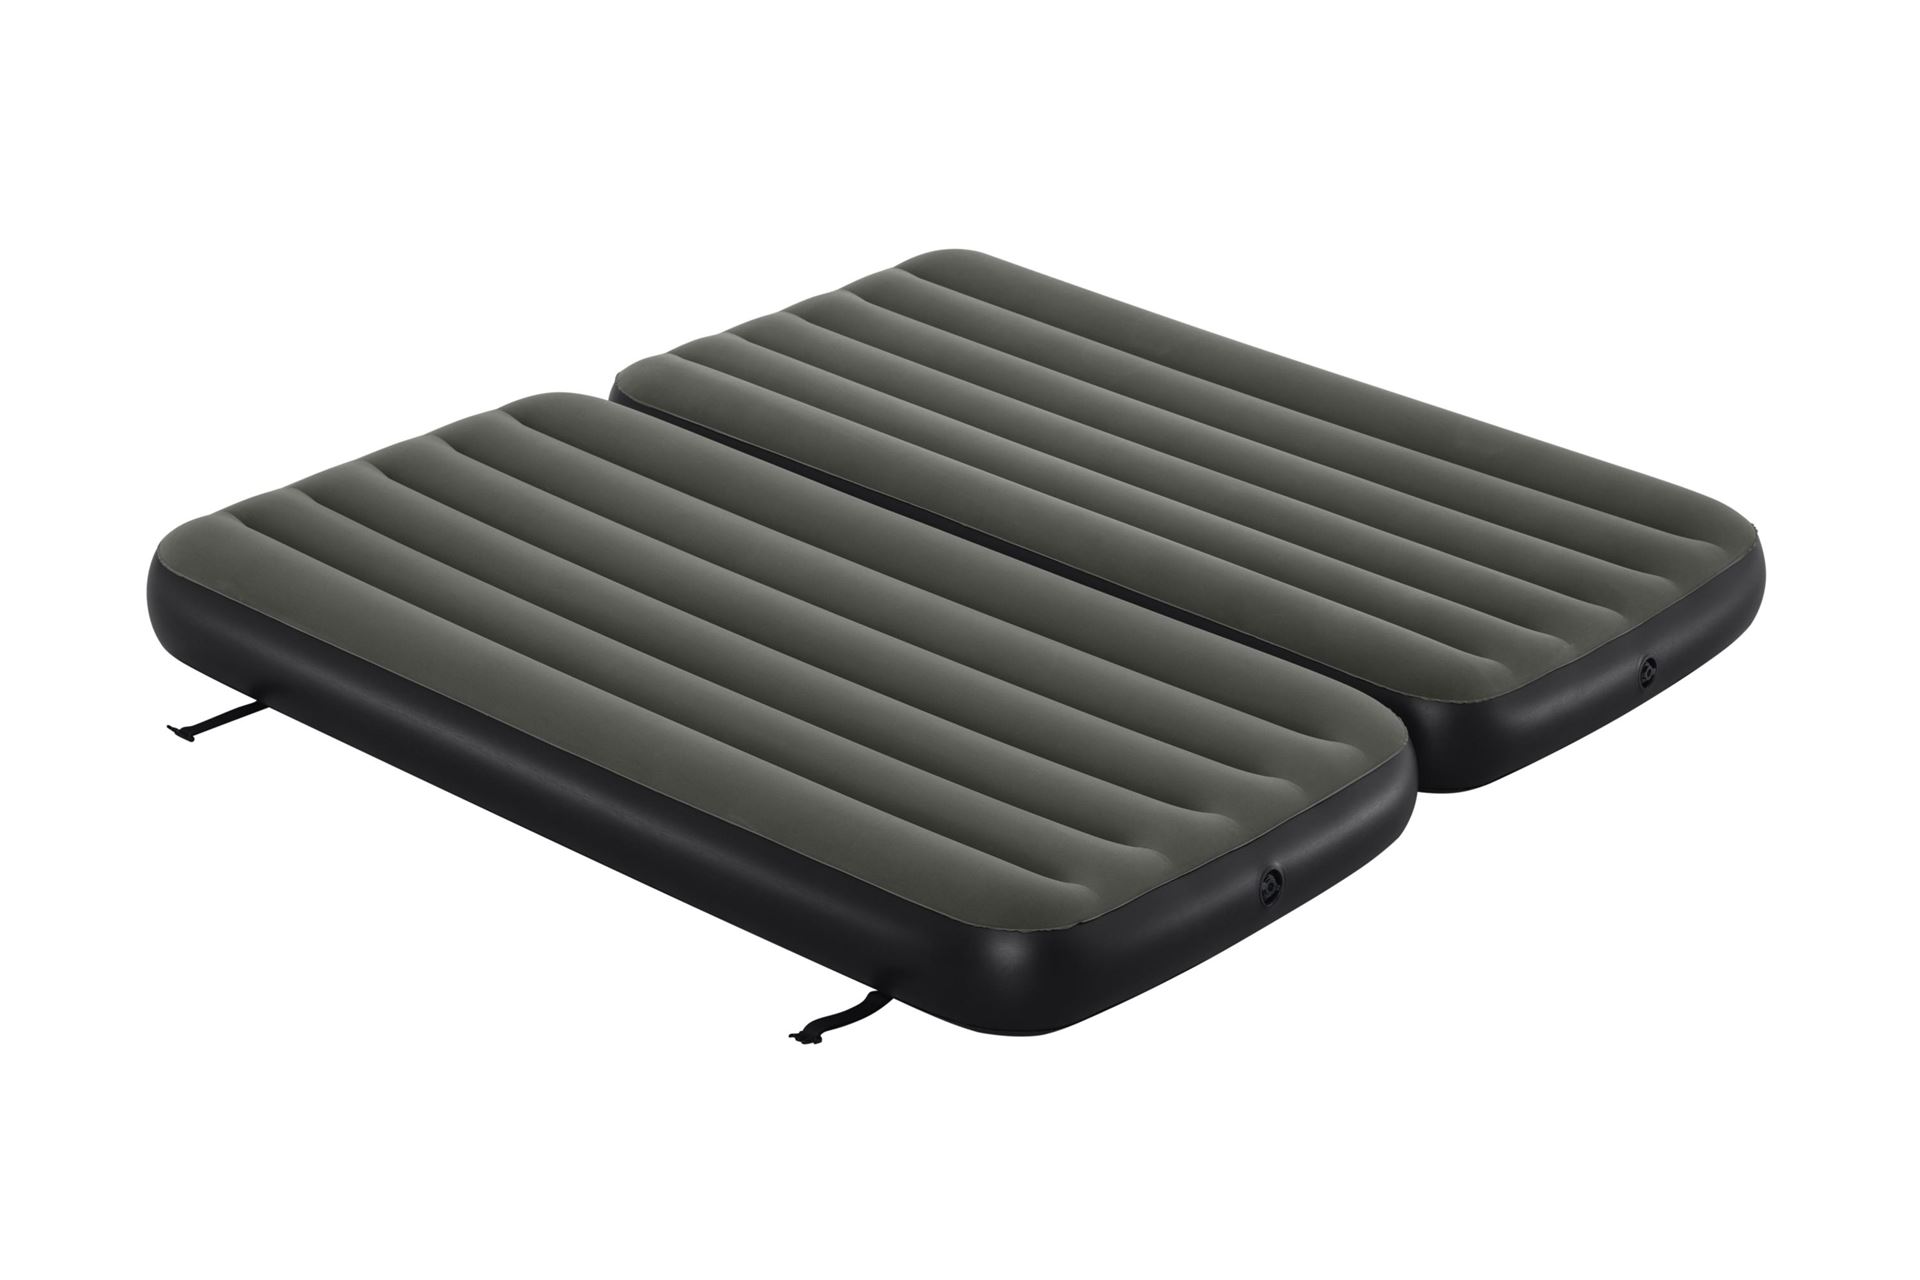 Bestway-74-x-39-x-10-1-88m-x-99cm-x-25cm-Tritech-Connect-and-Rest-3-in-1-Air-Mattress-Twin-King